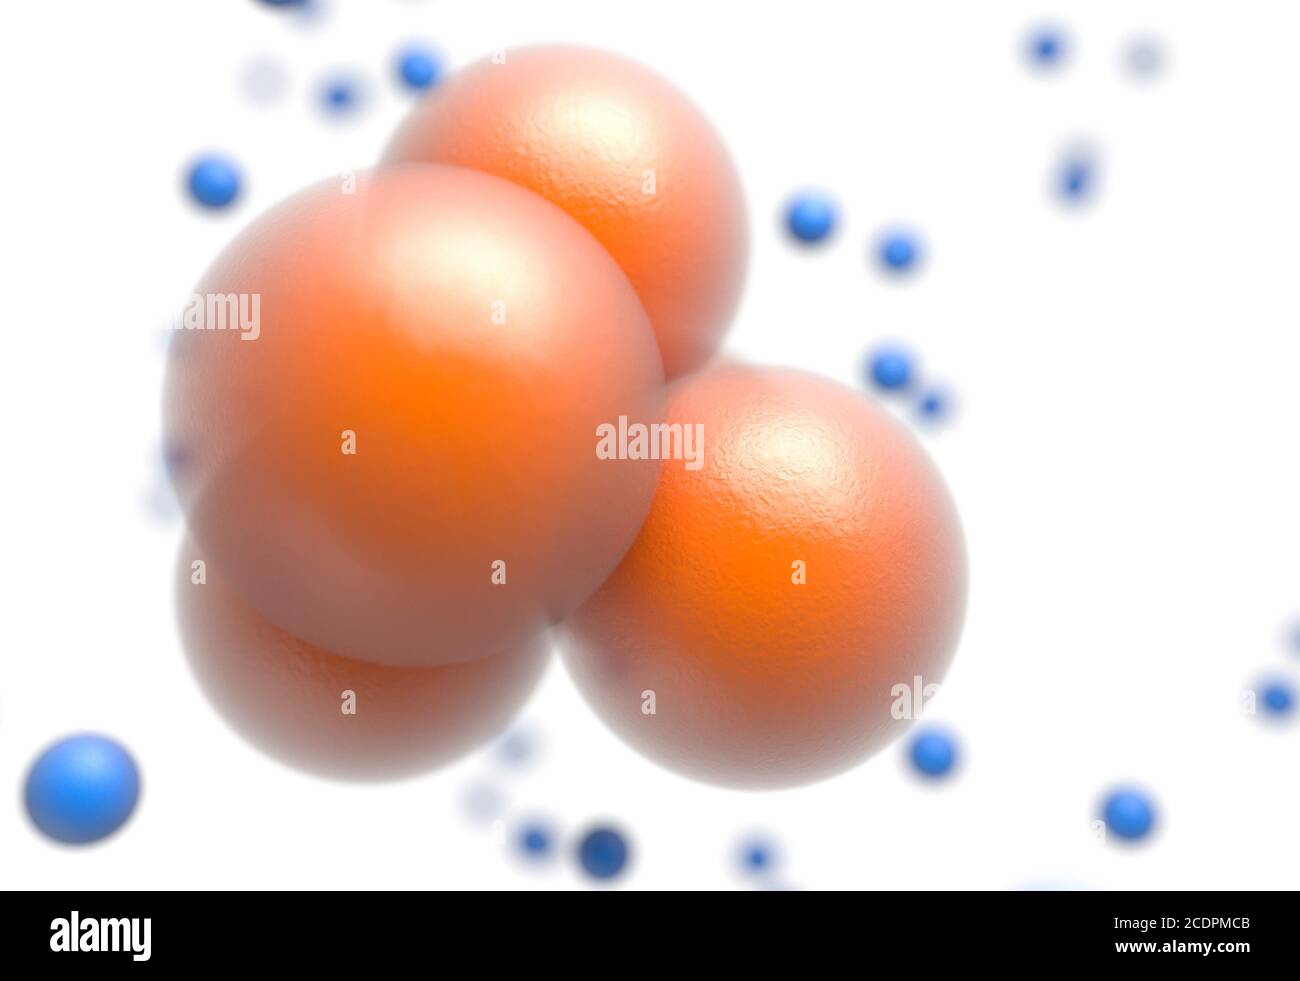 Atoms, Elements or Molecules abstract 3d illustration. Stock Photo